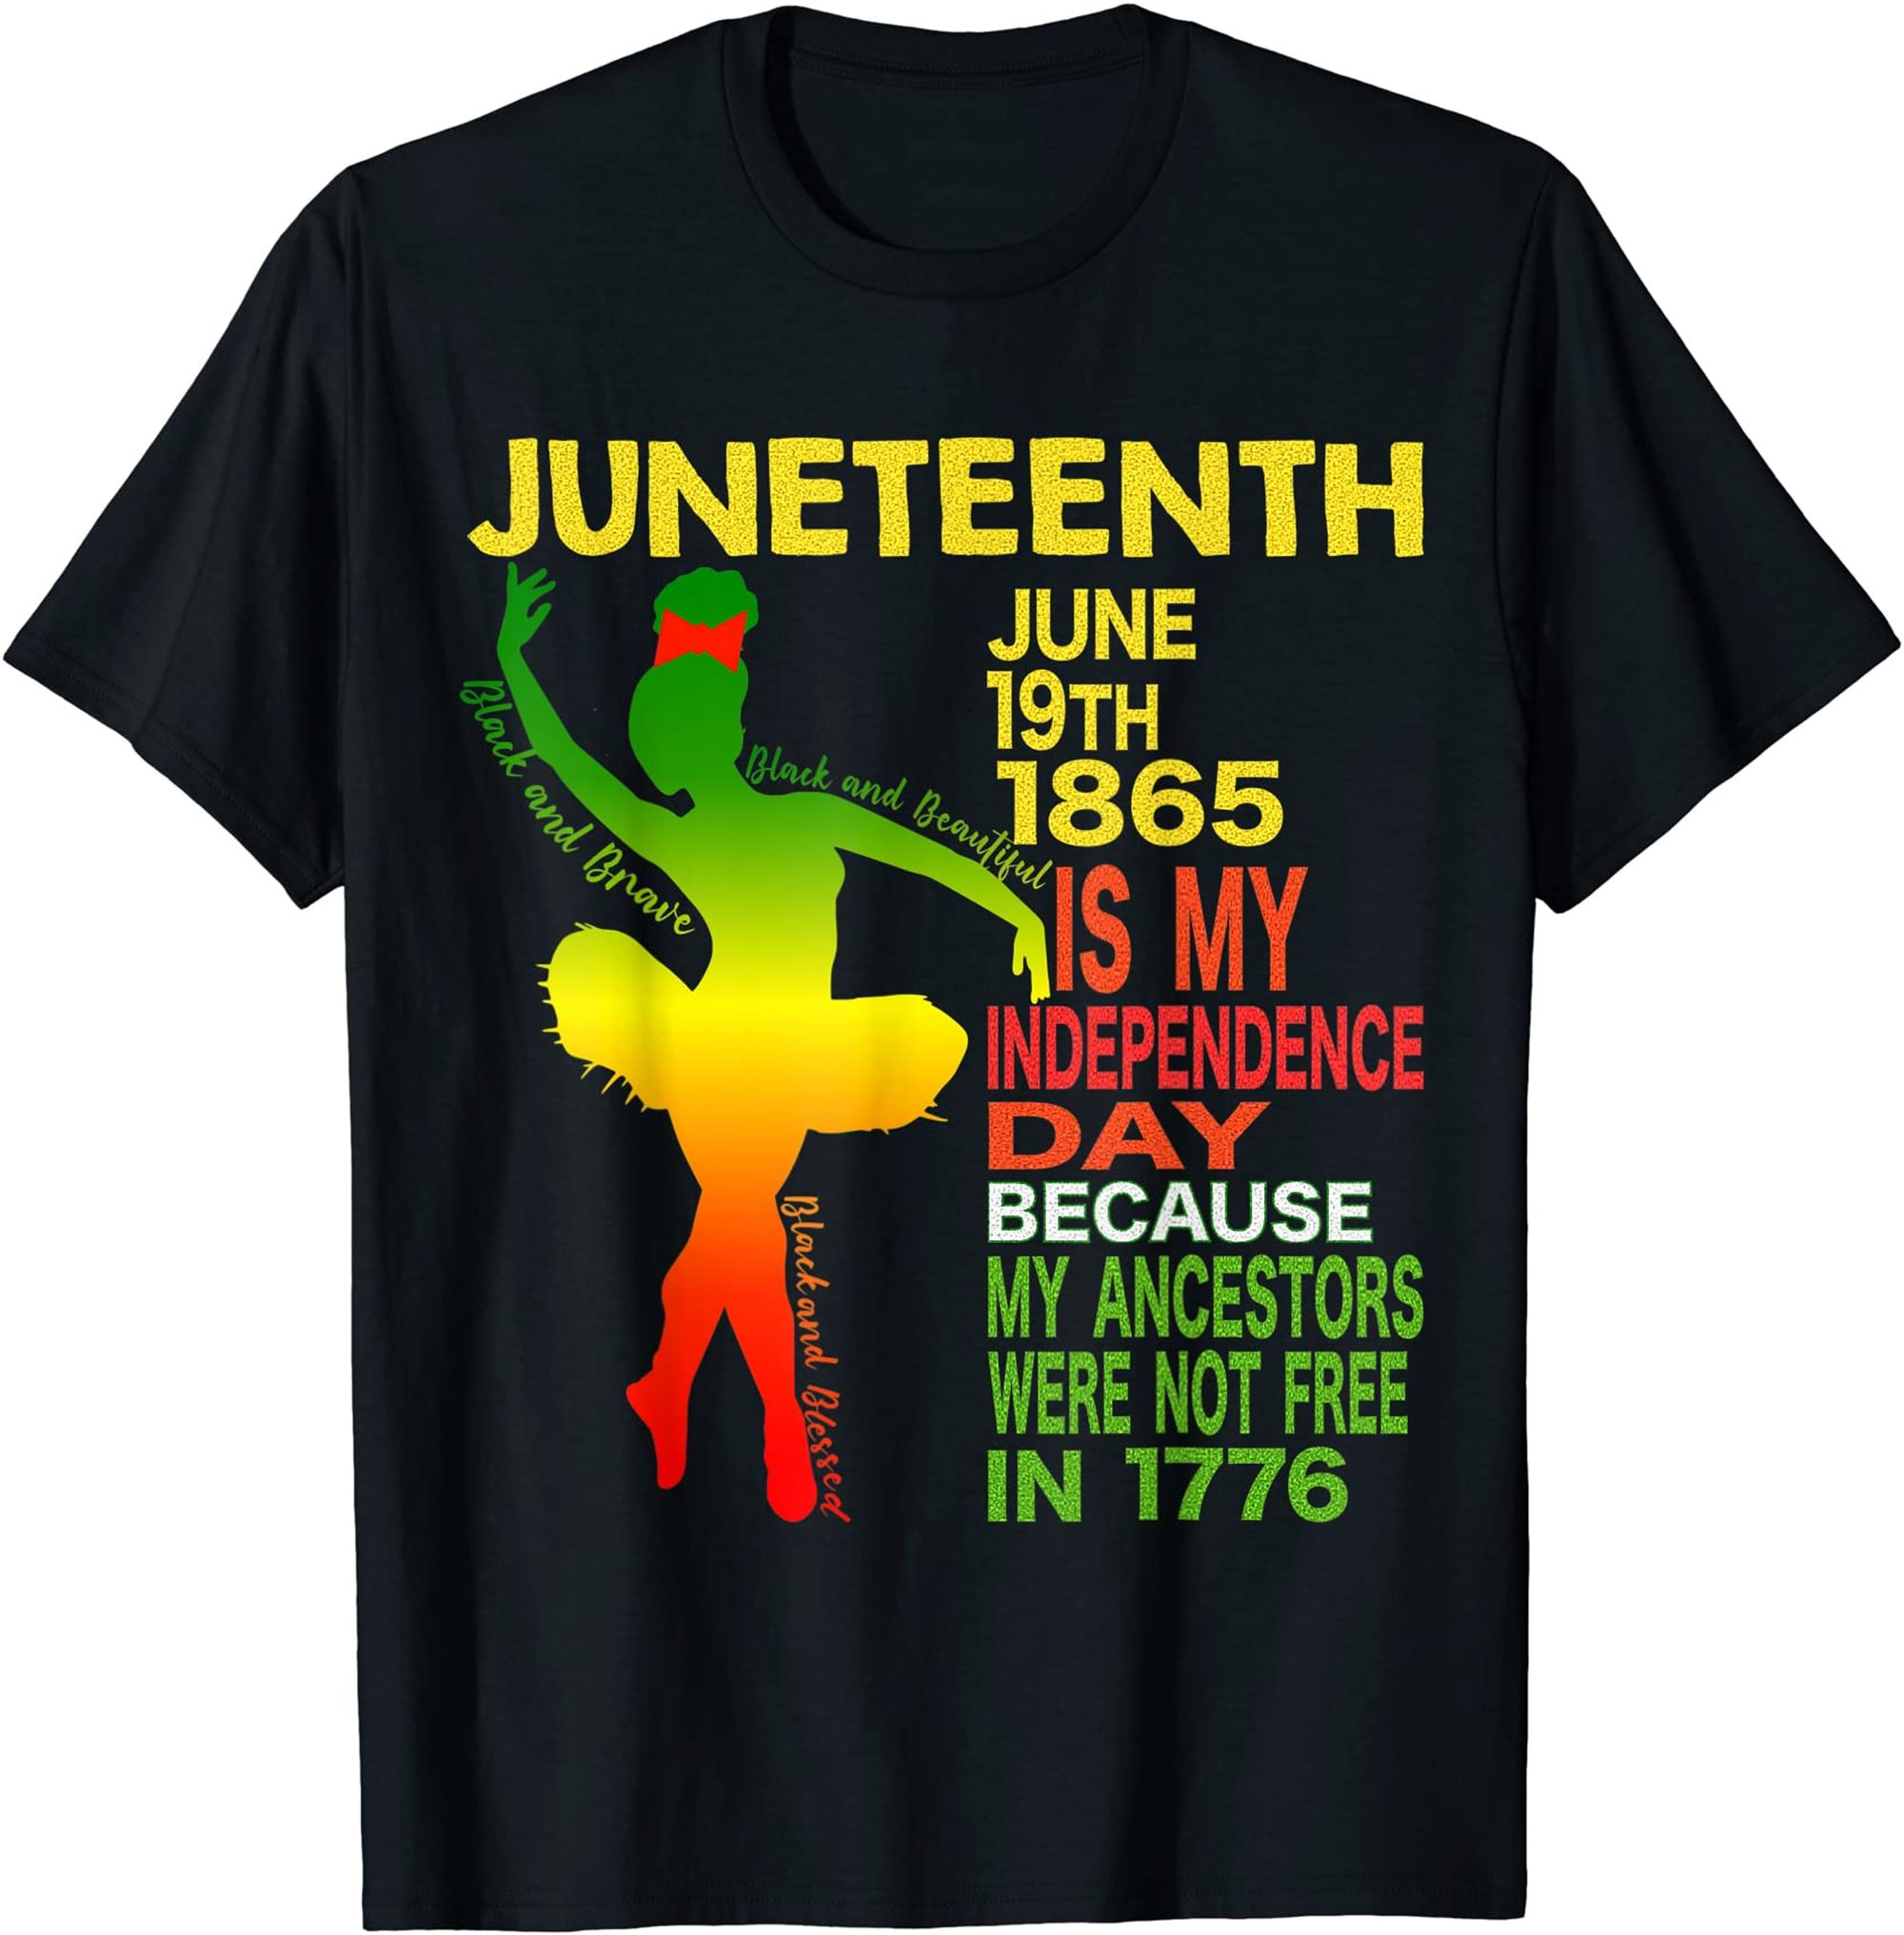 Happy Juneteenth Independence Dancer Black Girl Ballerina T-shirt Plus Size Up To 5xl